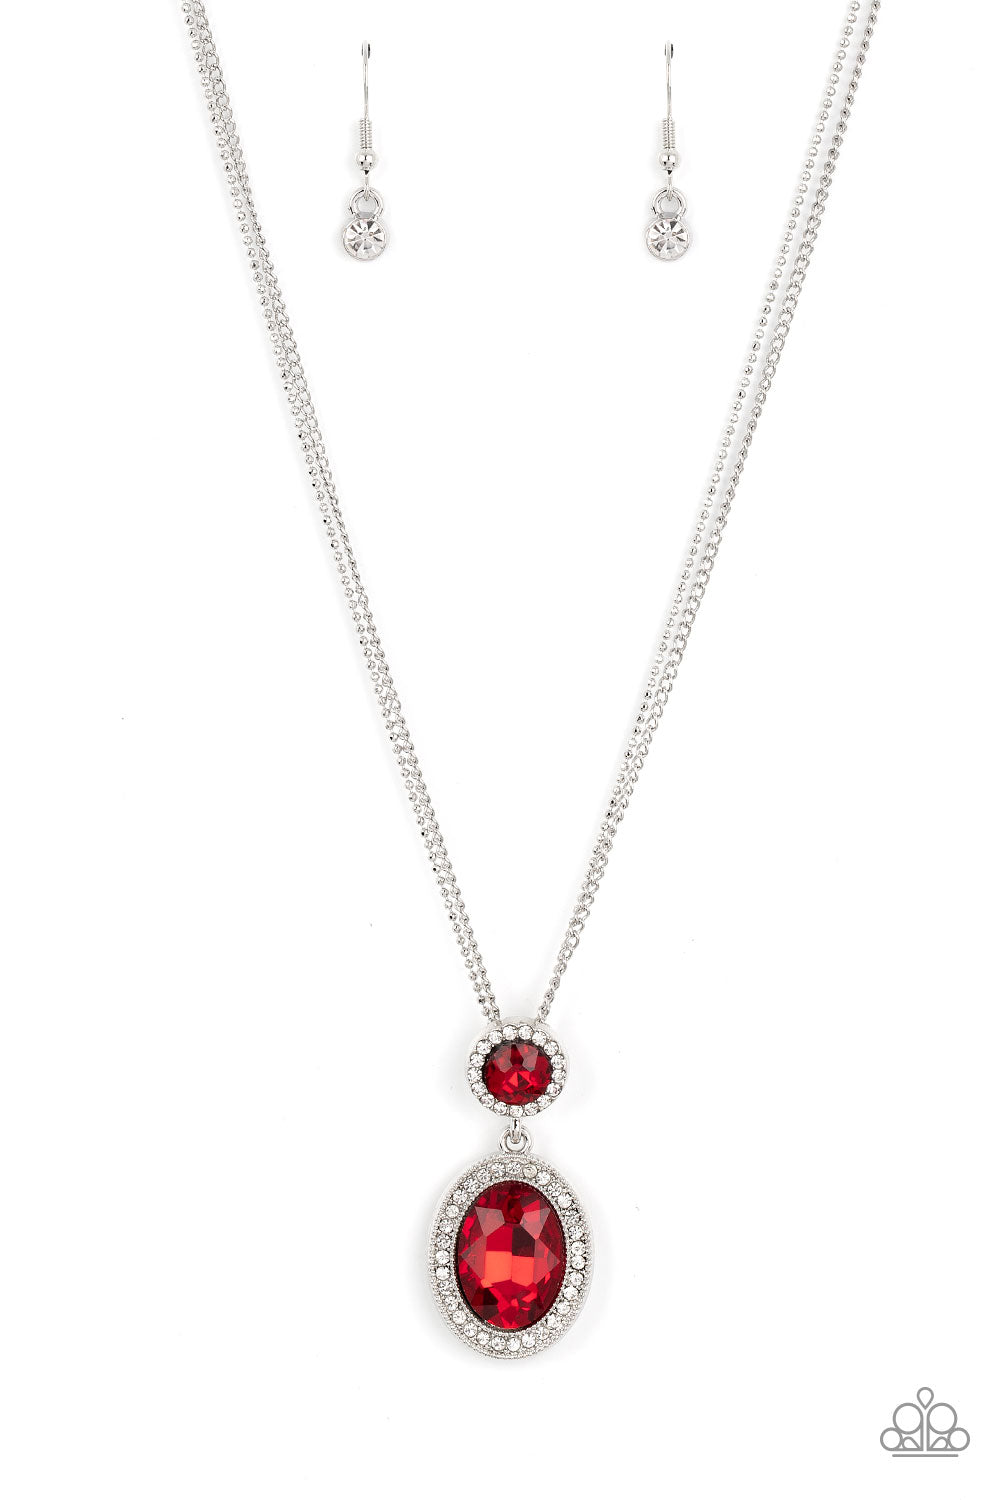 Castle Diamonds Necklace (Brown, Silver, Red)